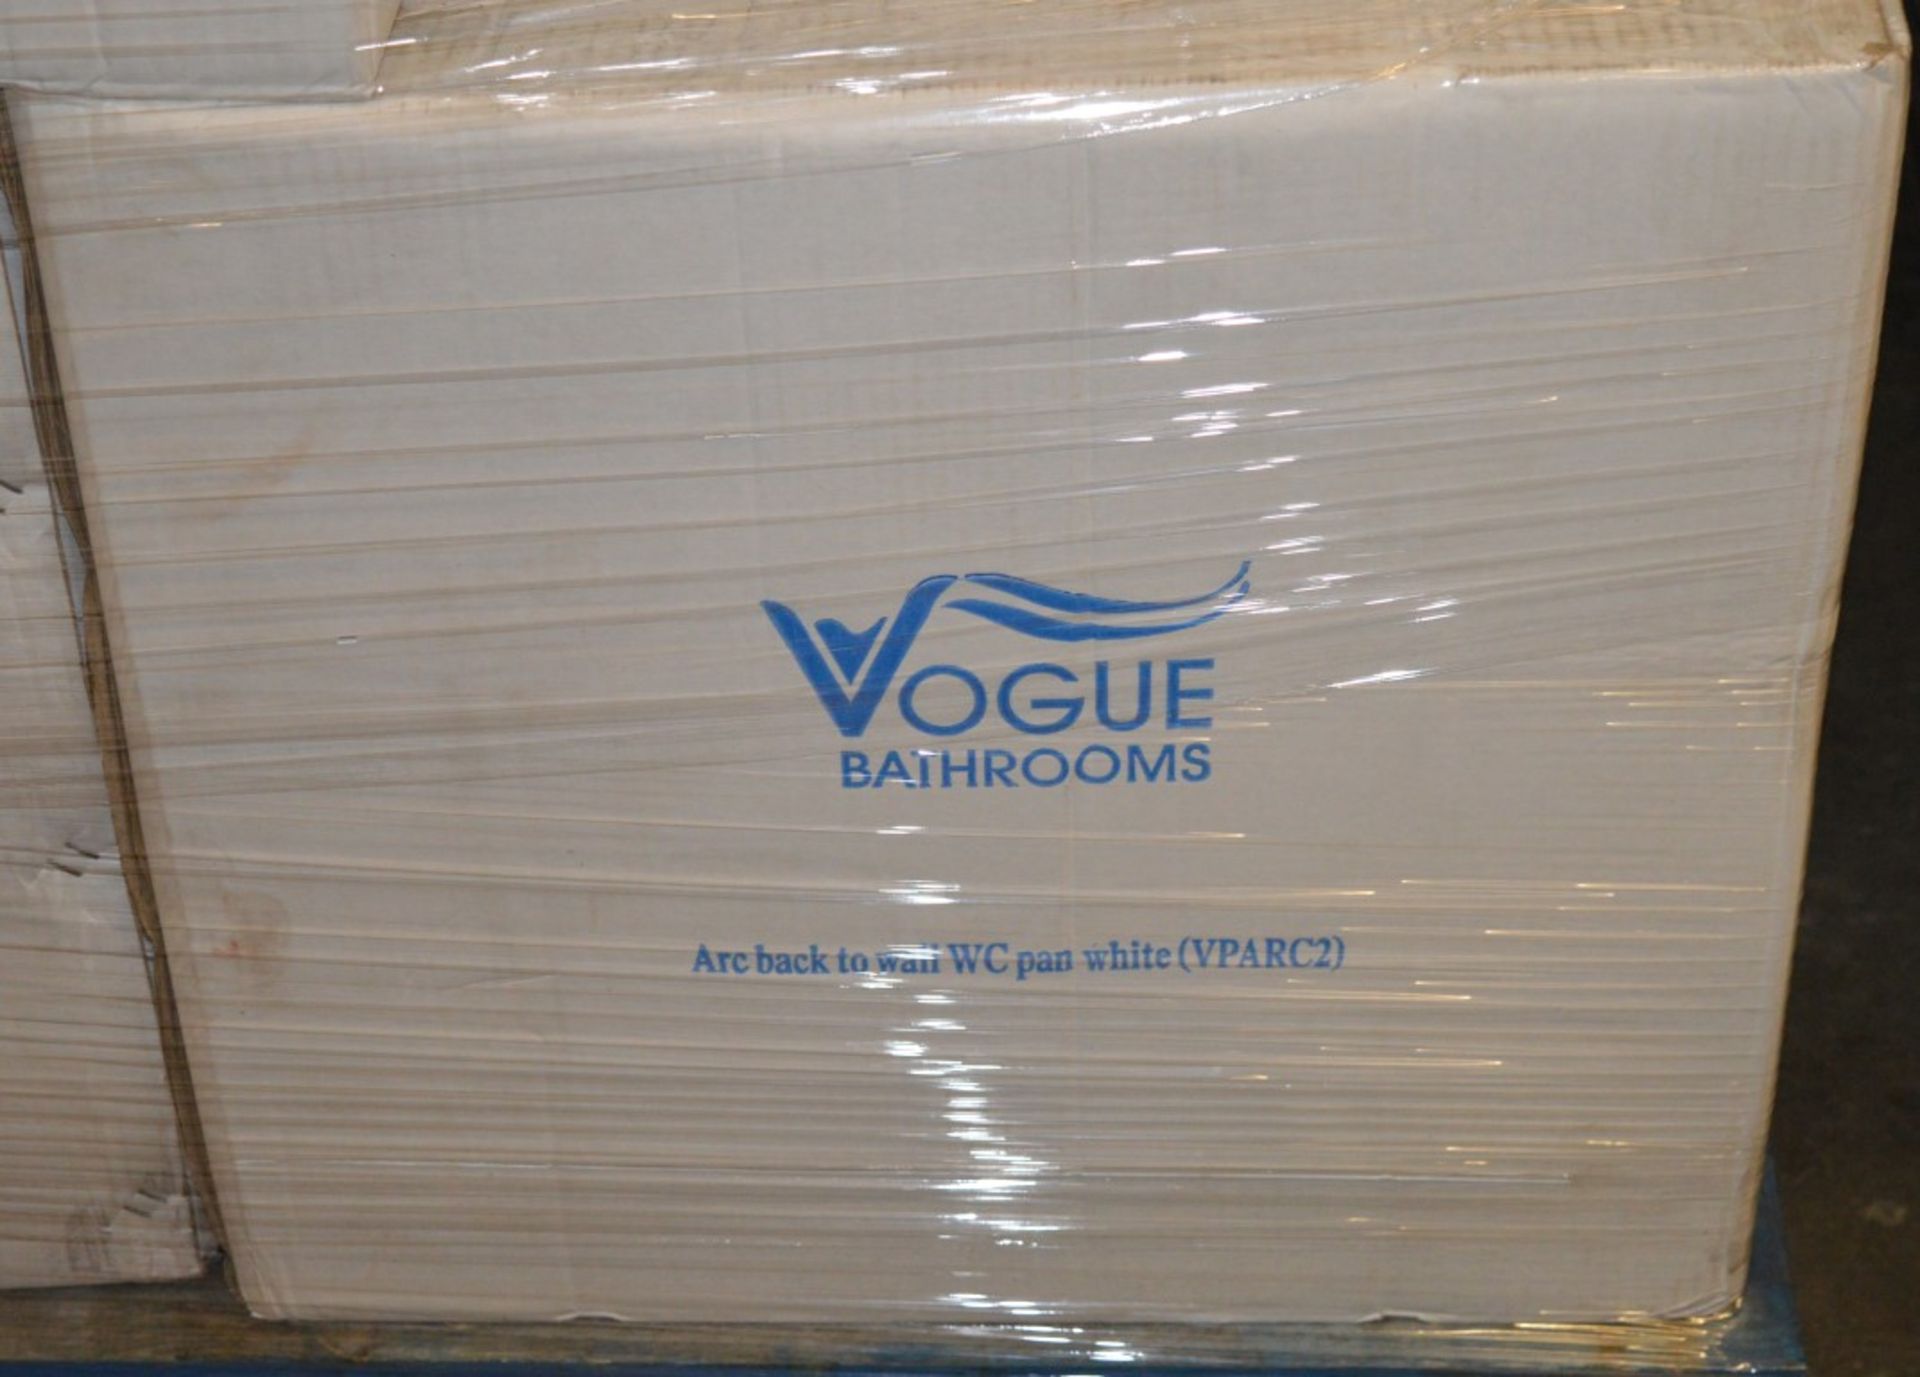 1 x Arc Back to Wall WC Toilet Pan With Soft Close Seat - Vogue Bathrooms - Brand New Boxed - Image 5 of 6